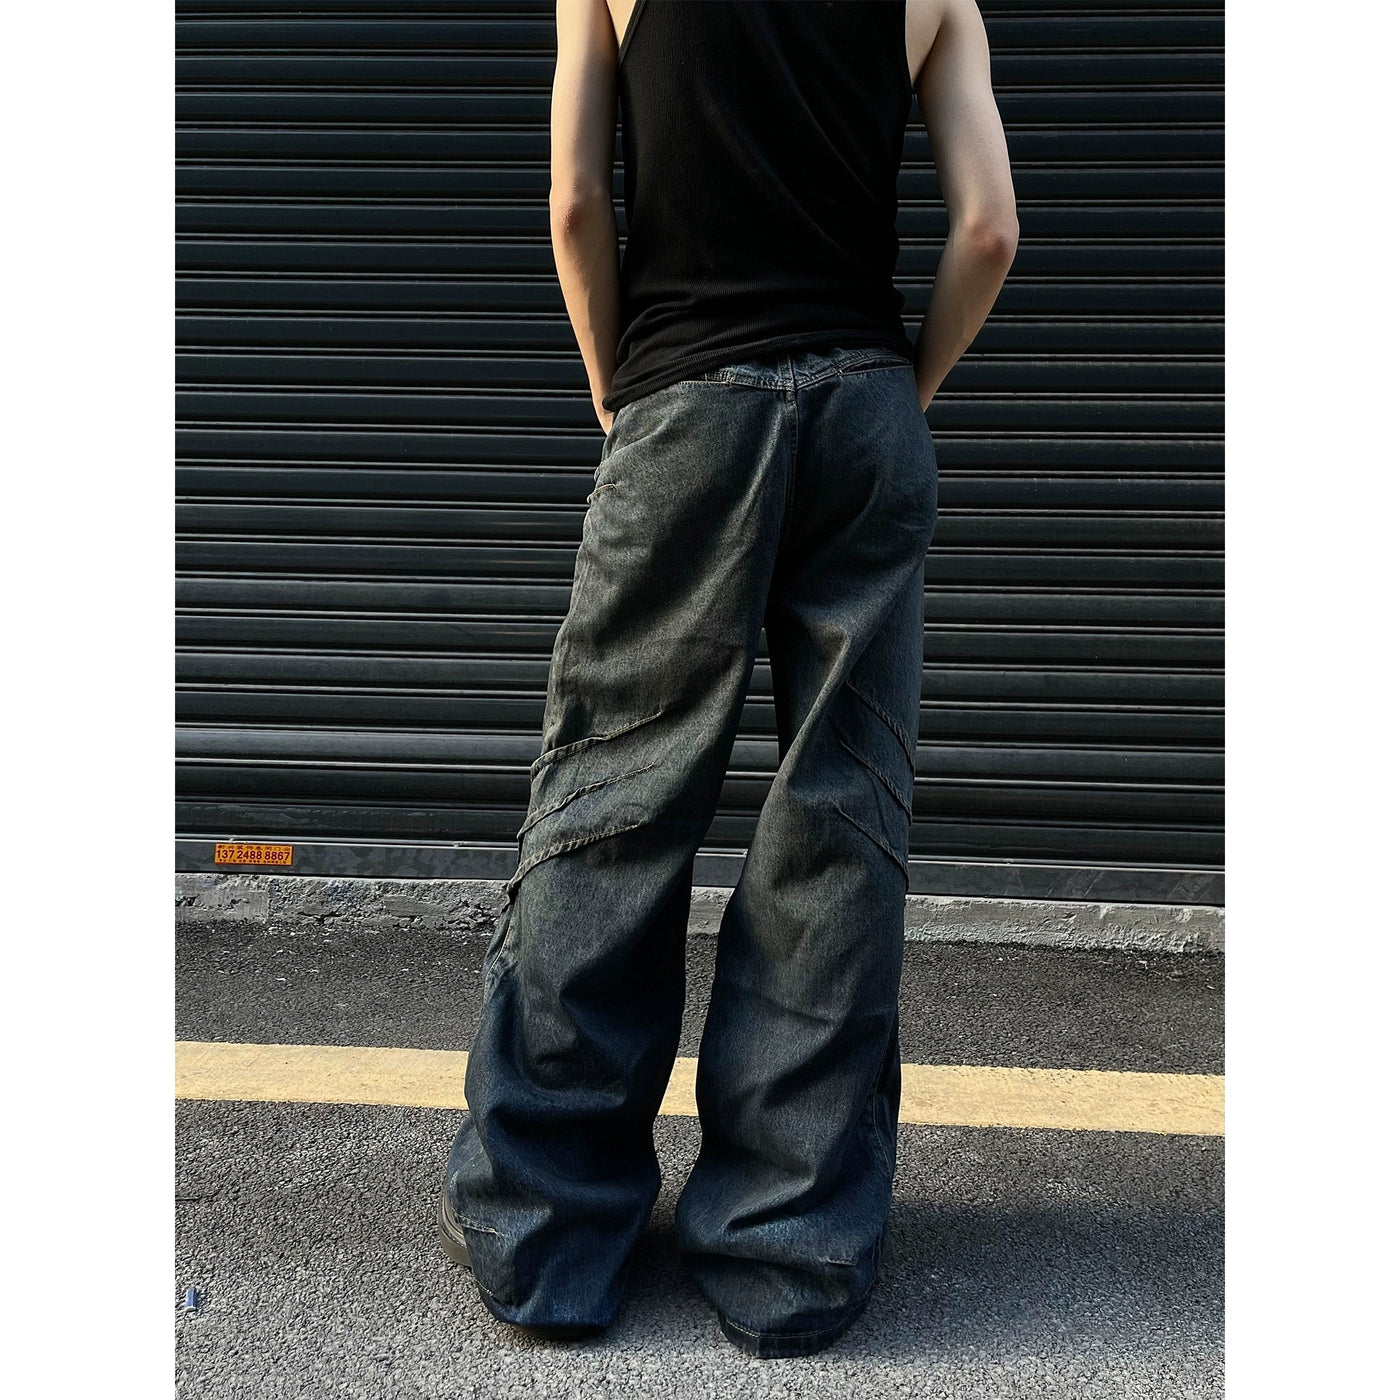 Heavy Shark Line Flared Jeans Korean Street Fashion Jeans By MaxDstr Shop Online at OH Vault